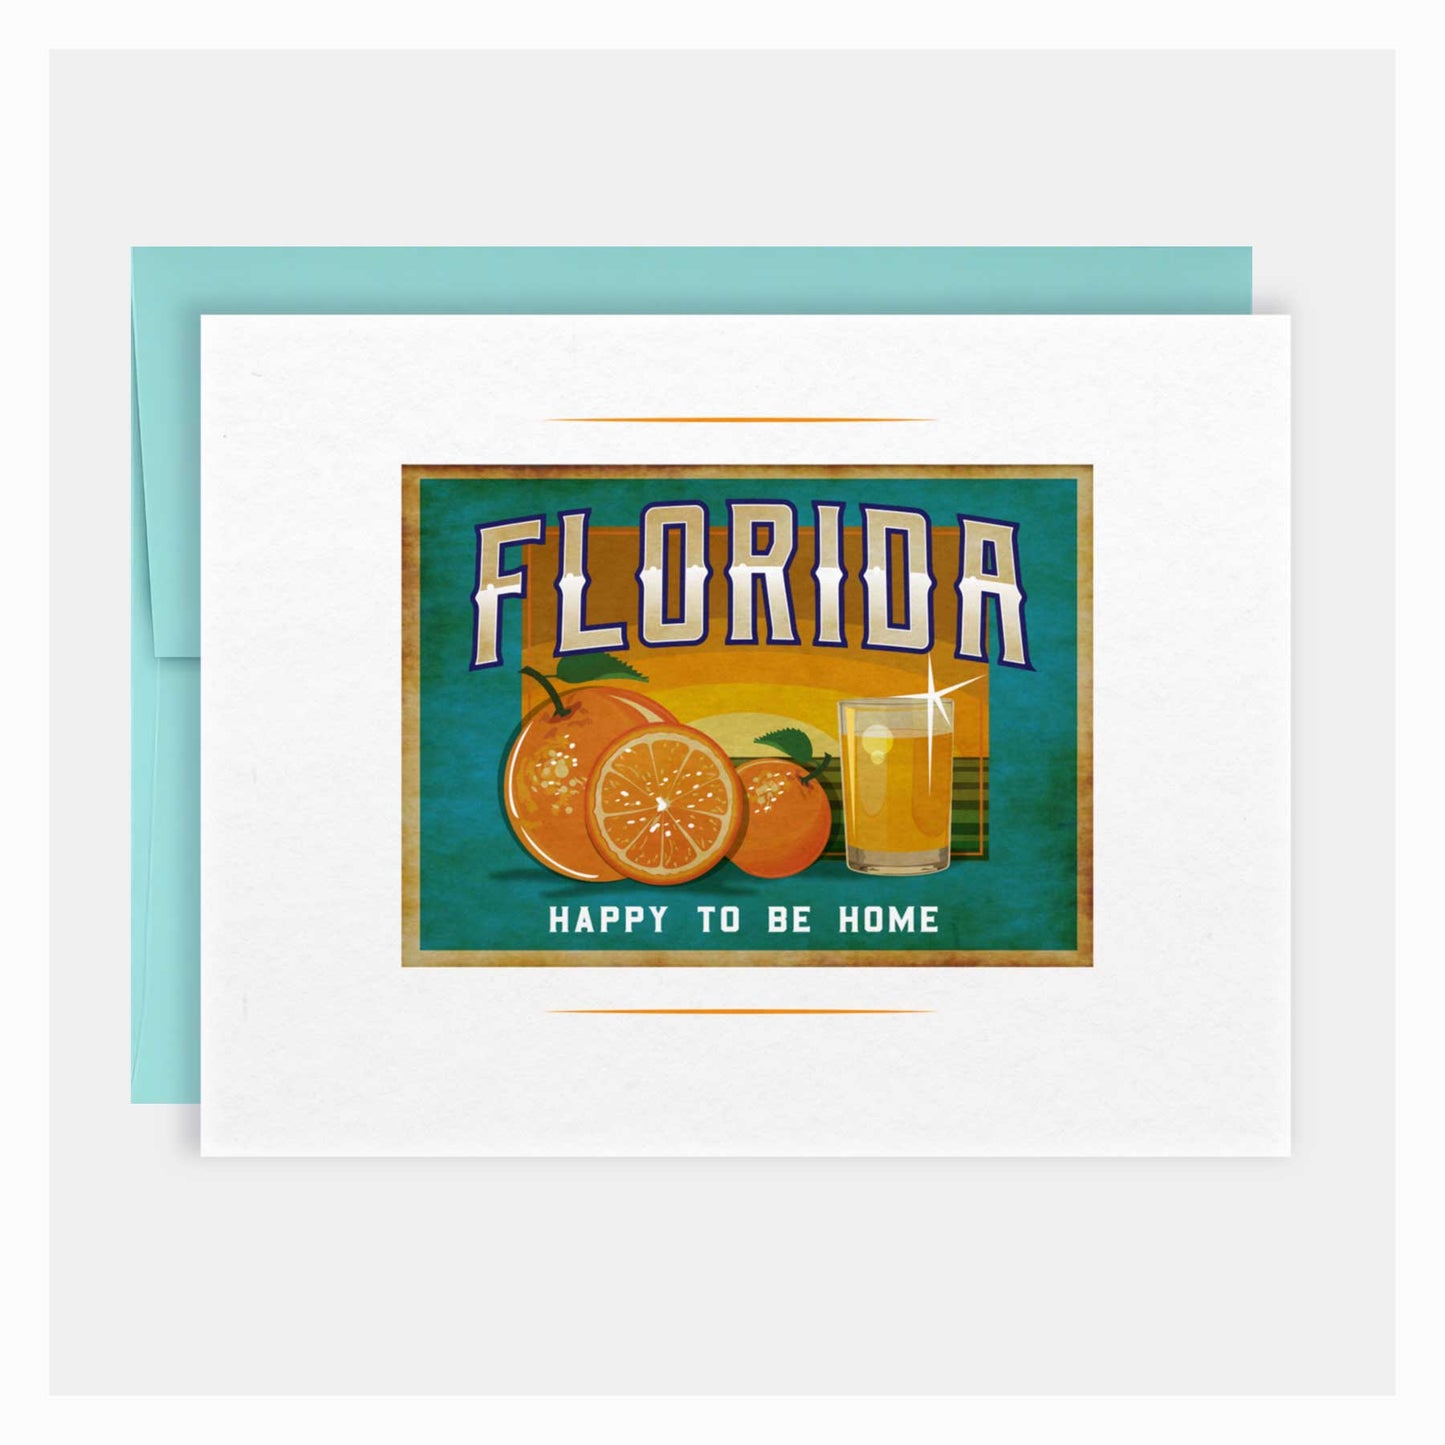 Florida Happy to be Home Greeting Card - A. B. Newton and Company